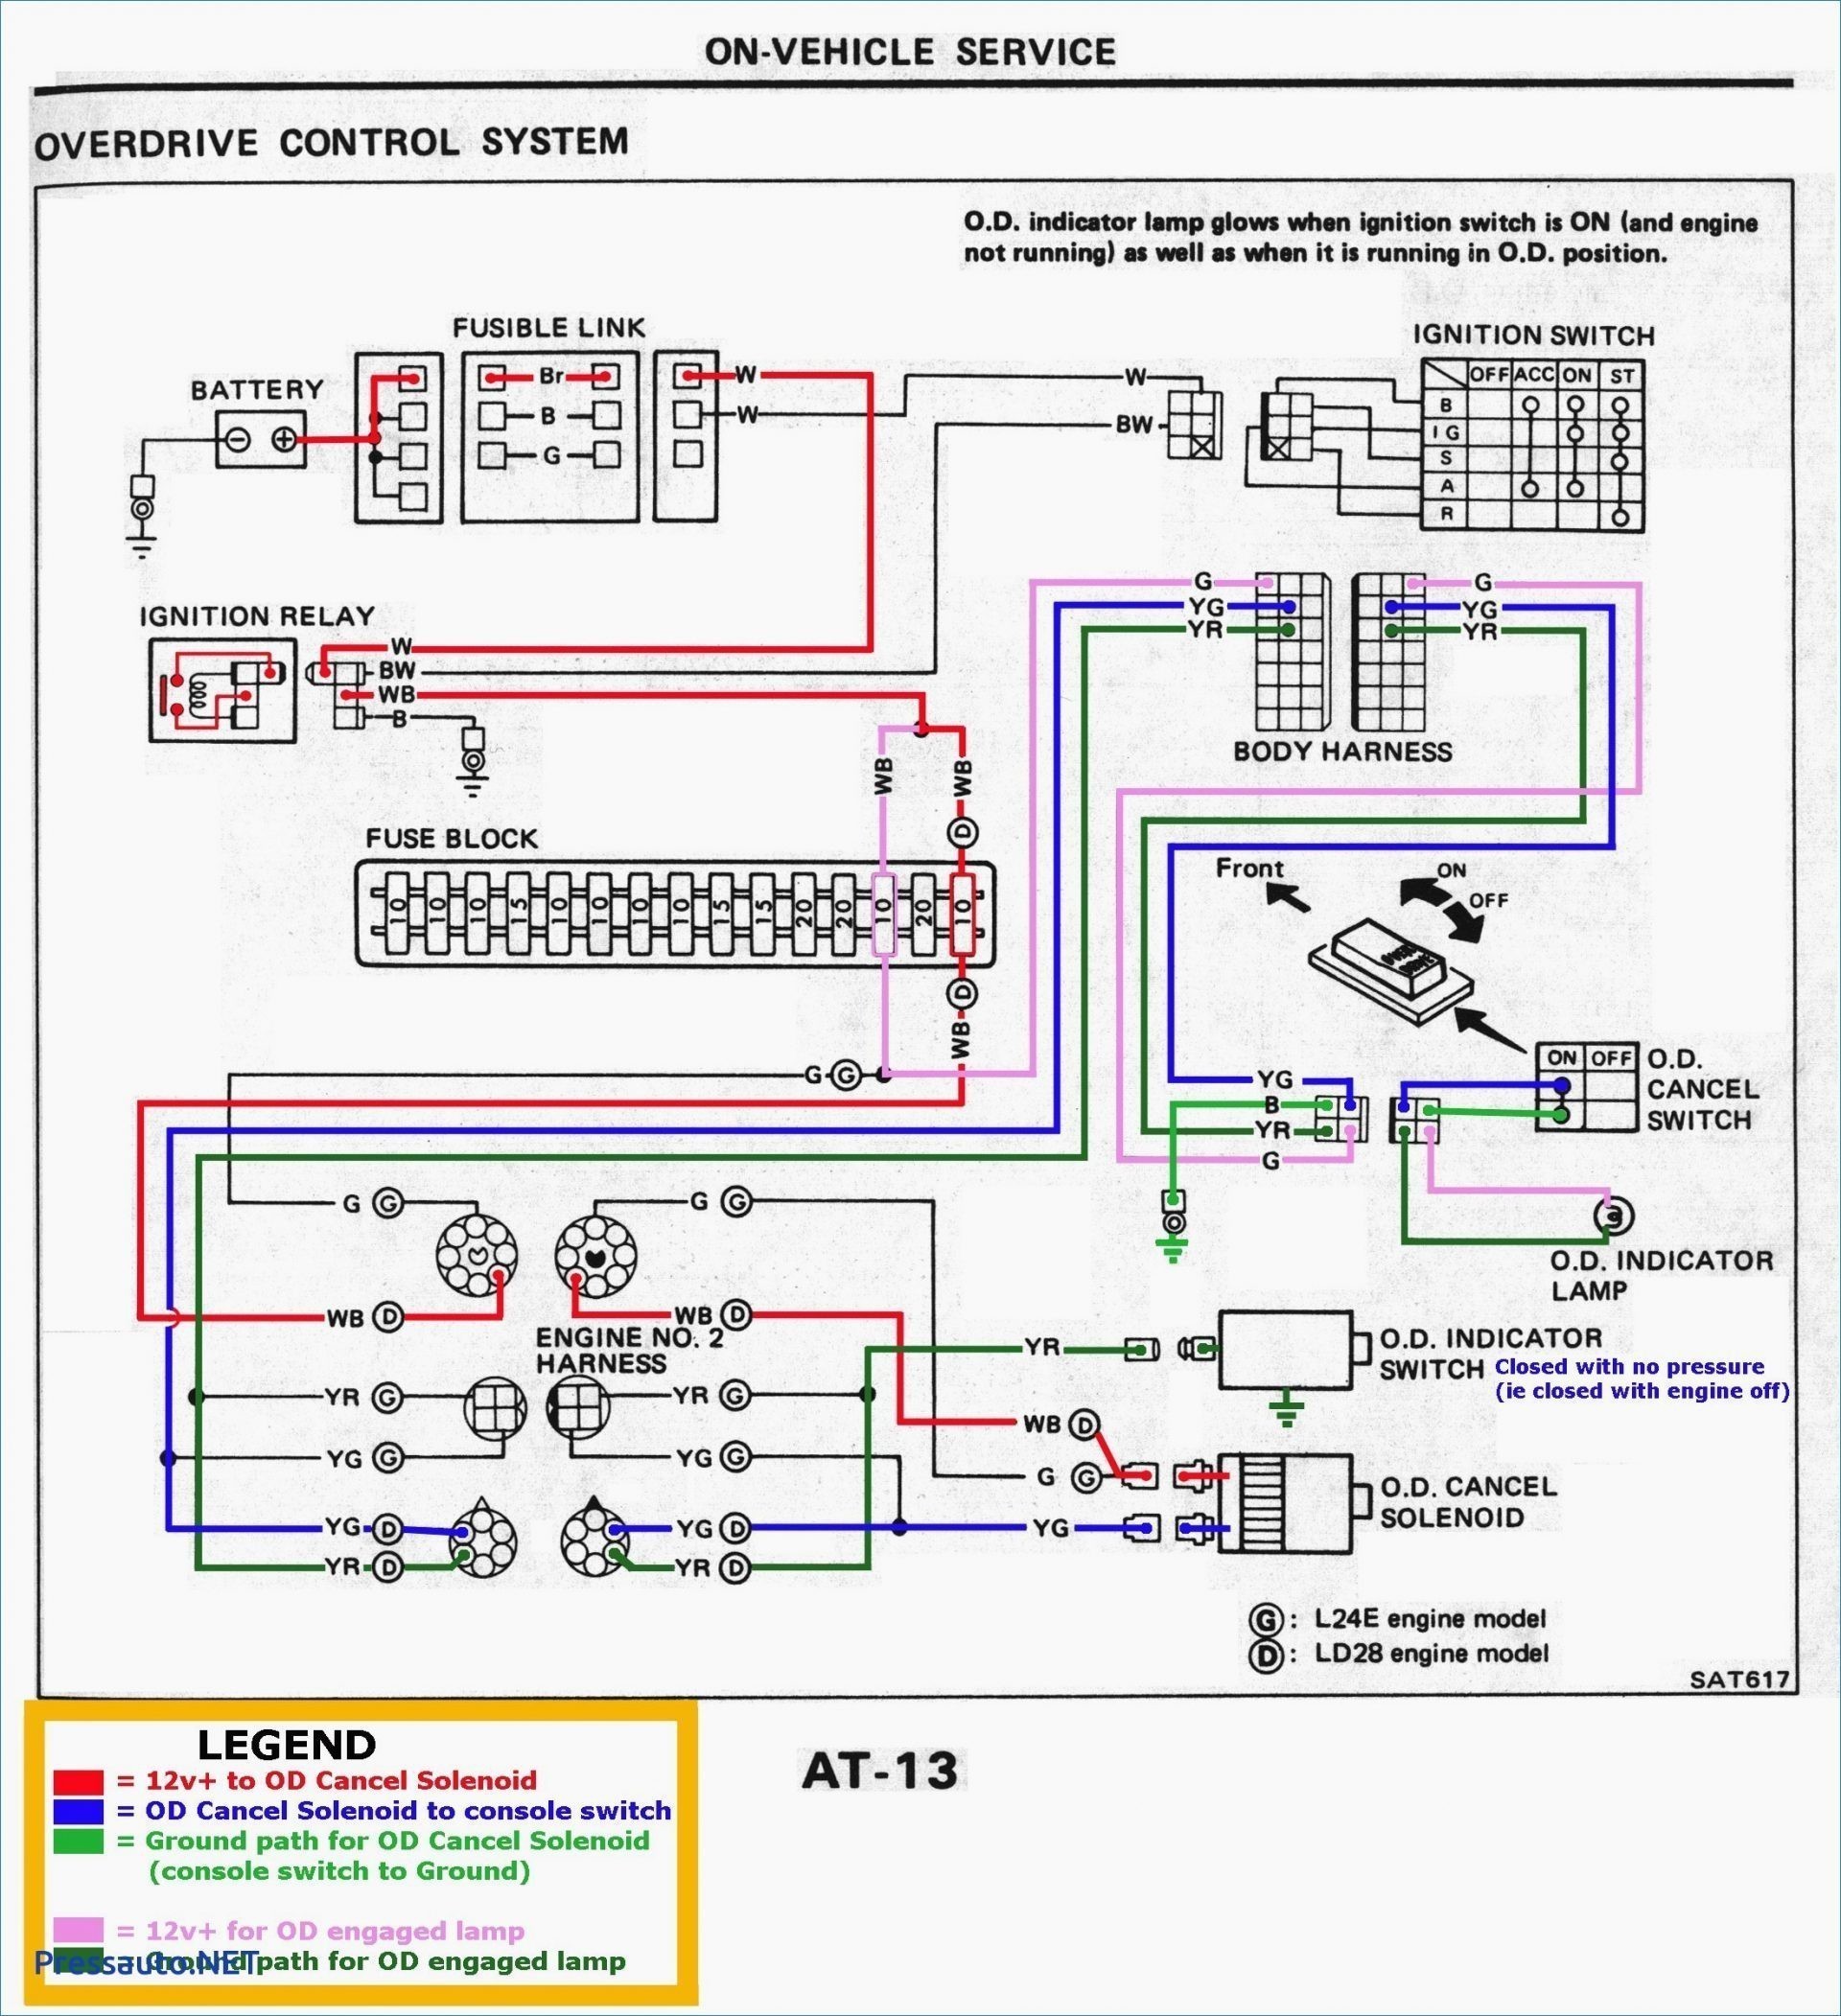 inverter output wiring diagram refrence wiring diagram for grid tie rh yourproducthere co Solar Micro Inverter Wiring Diagram RV Inverter Charger Wiring